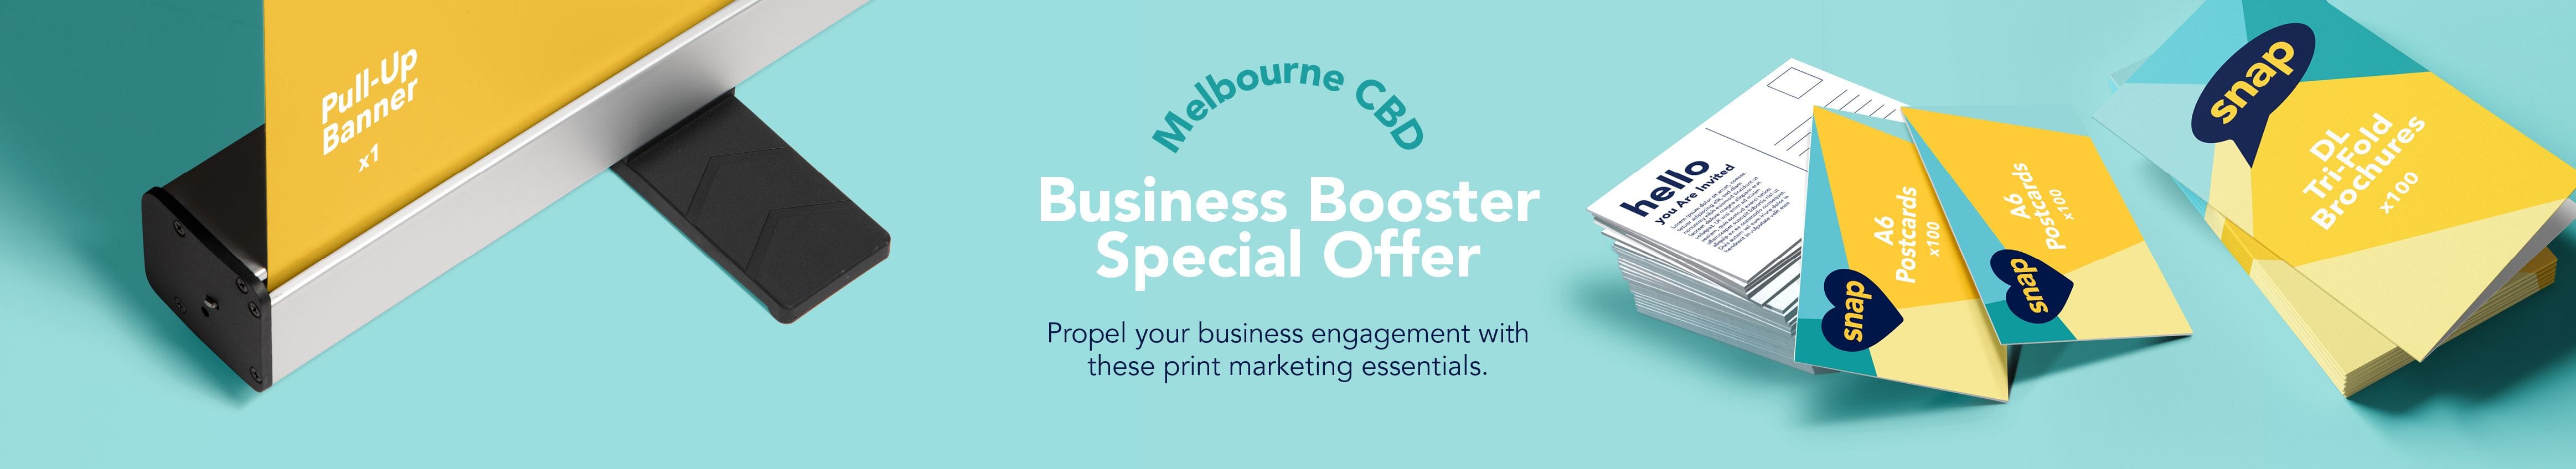 Print marketing essentials to propel your business engagement